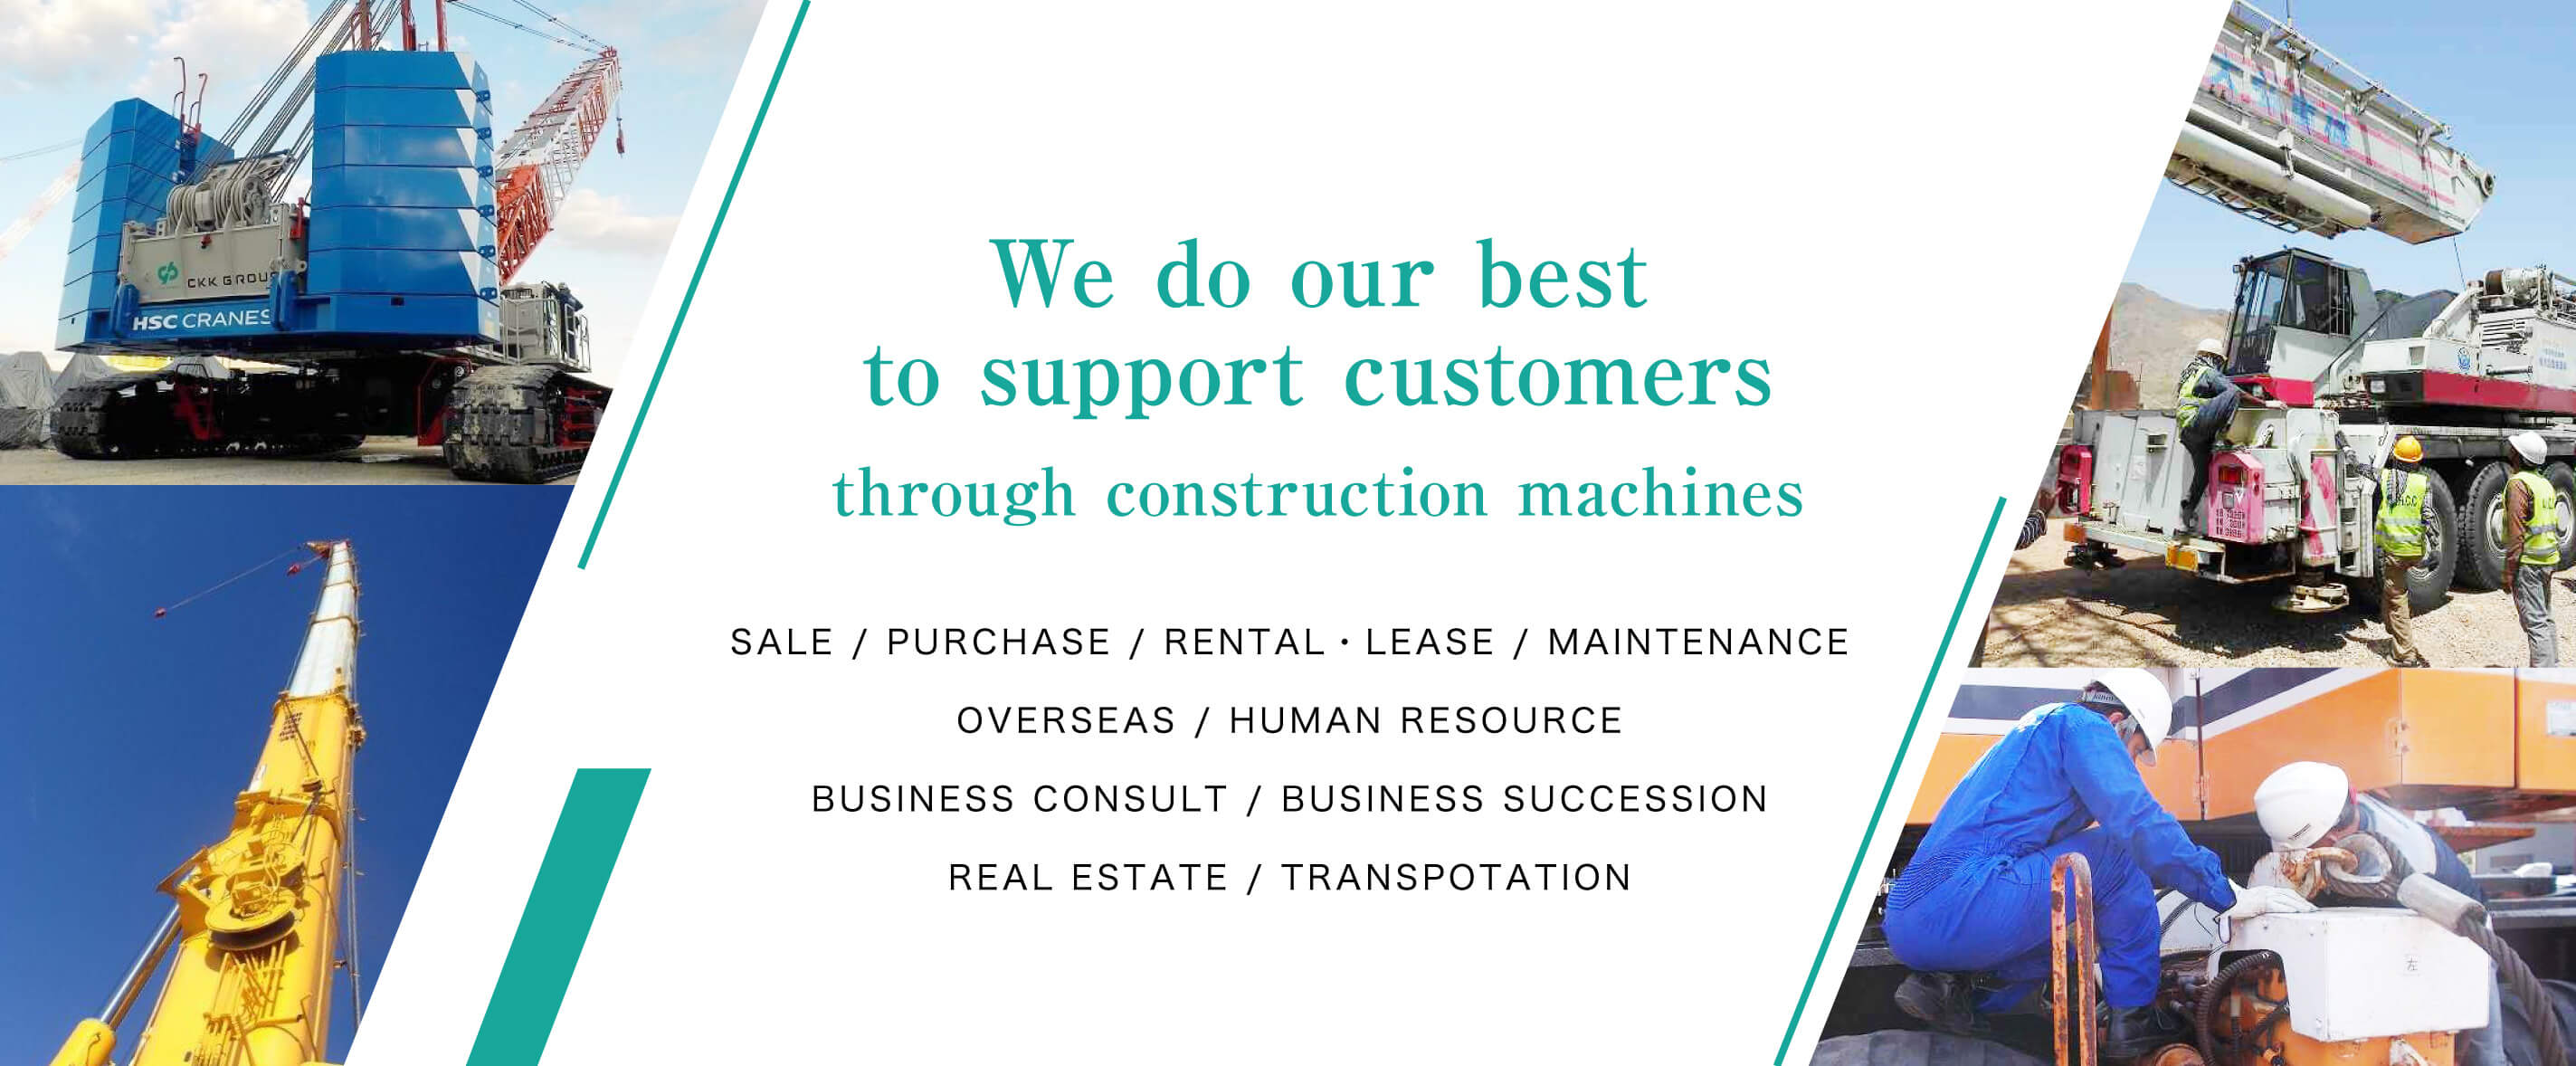 We will do our best to support customers through construction machines Sale / Buy / Rental・Lease / Maintanance / Overseas /  Human resource / Business consult / Business succession / Real estate / Transpotation